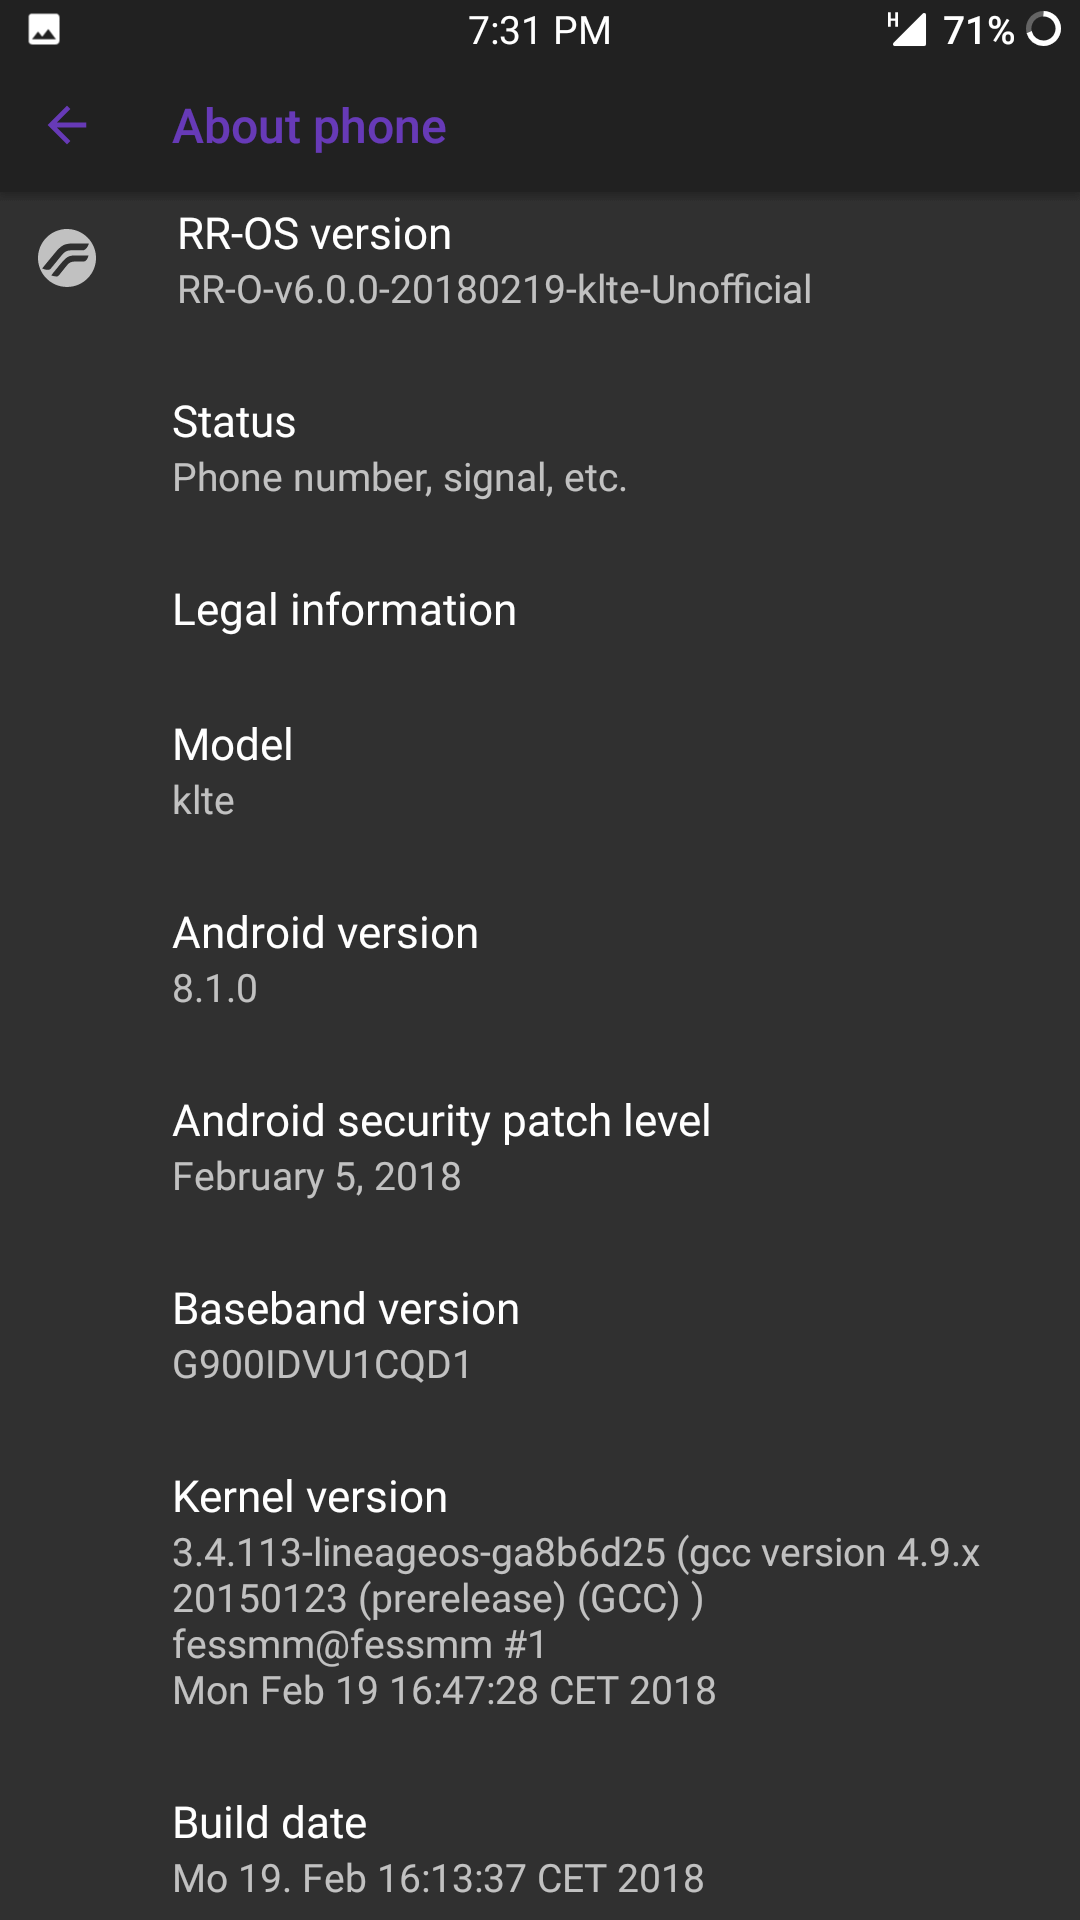 Get RRv6.0.0 Android 8.1 Oreo On Galaxy S5 (Snapdragon)